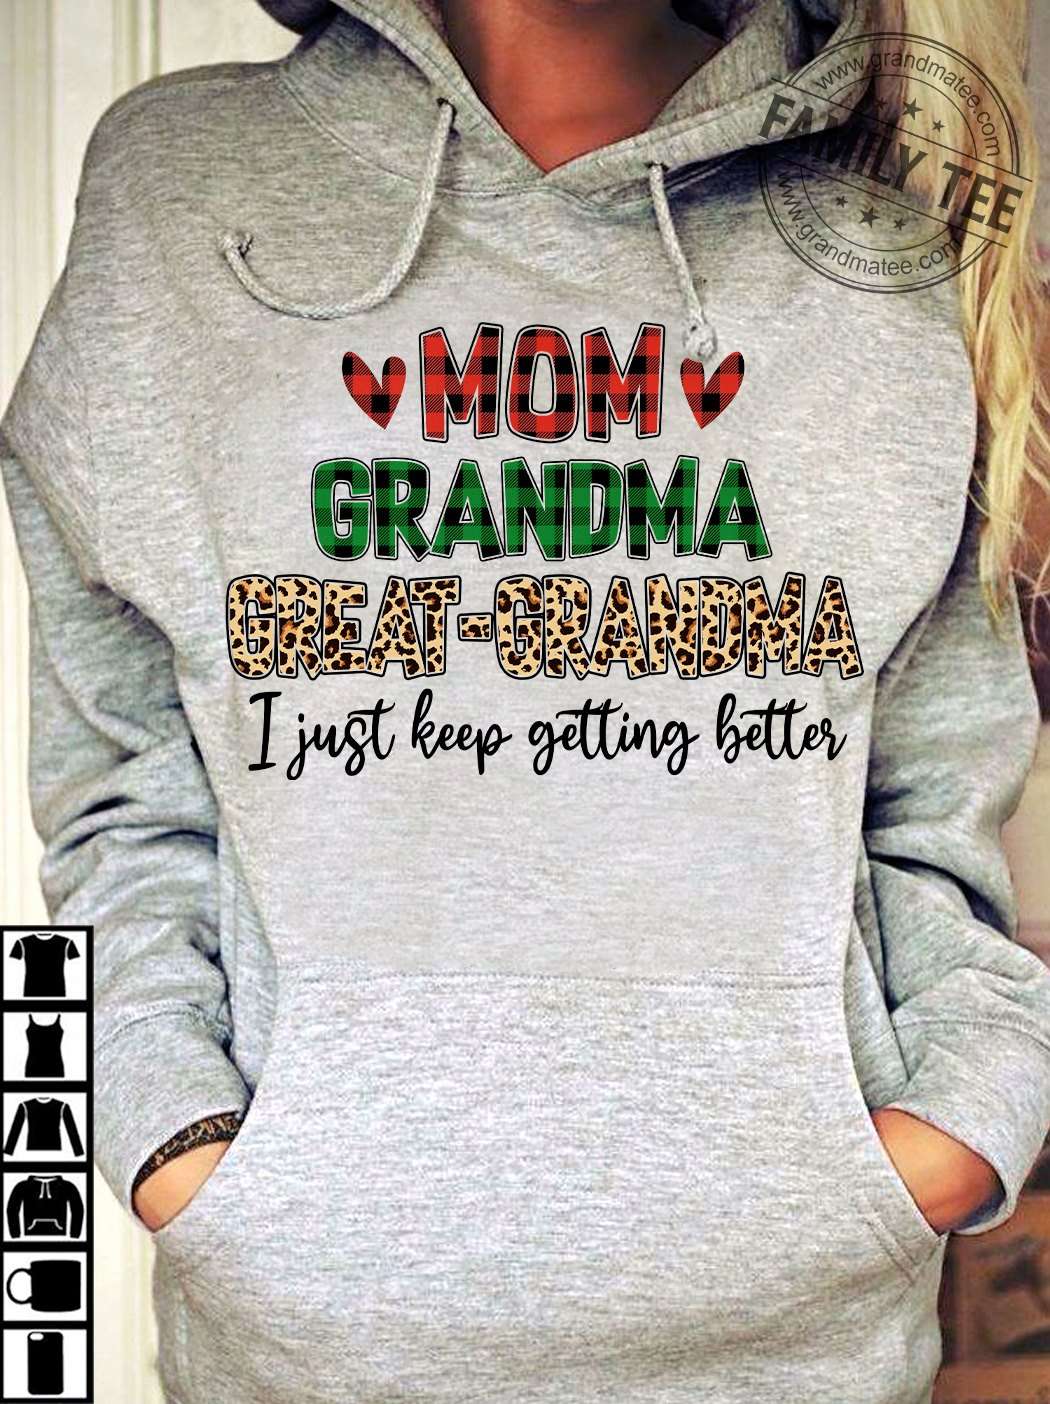 Mom grandma great-grandma i just keep getting better - Gift For Mother's Day